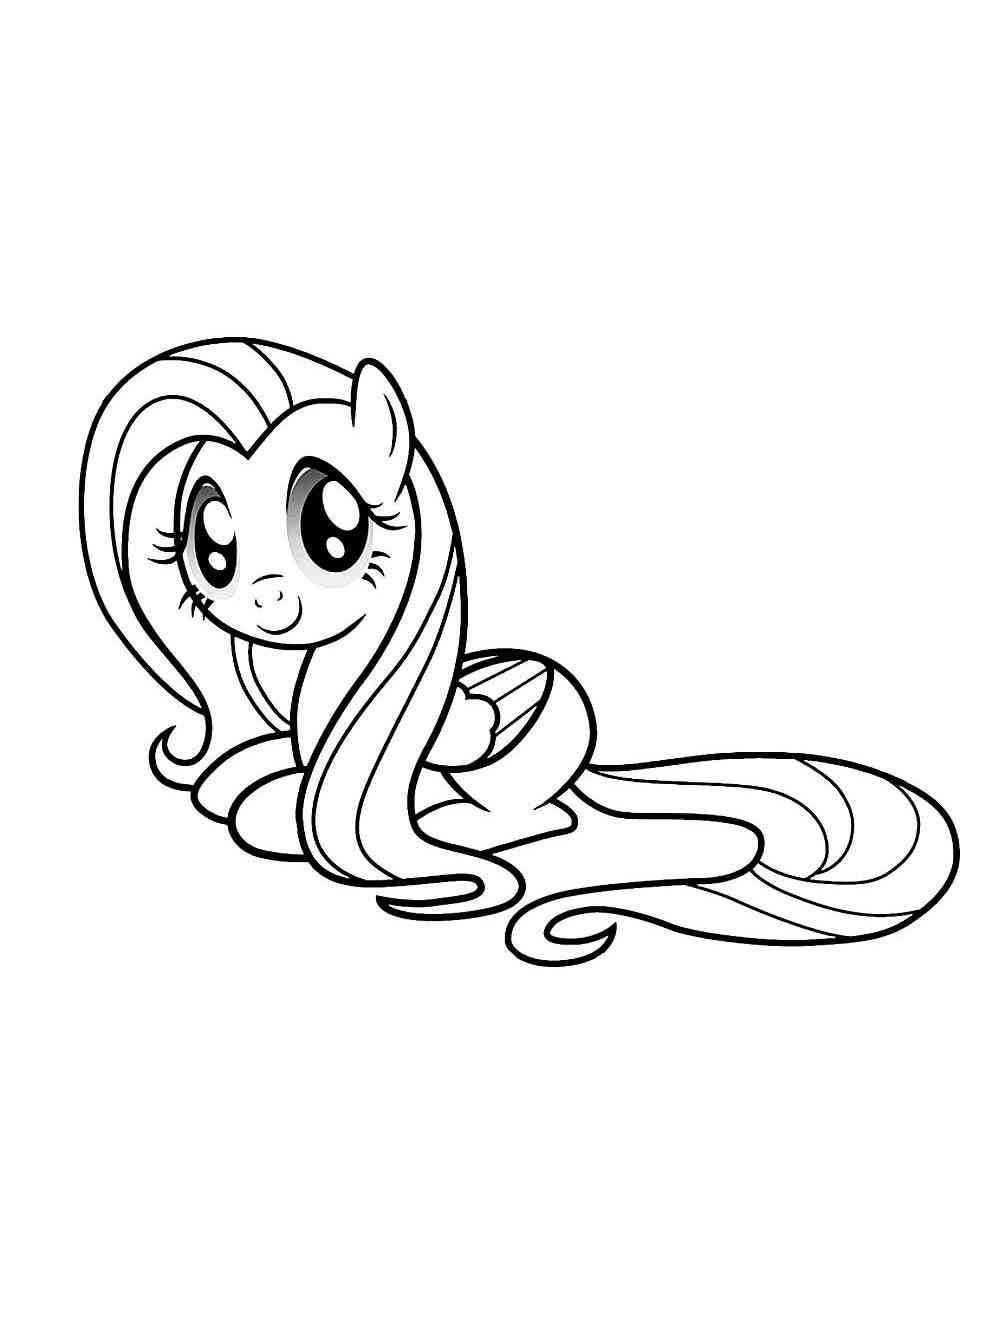 Fluttershy 13 coloring page